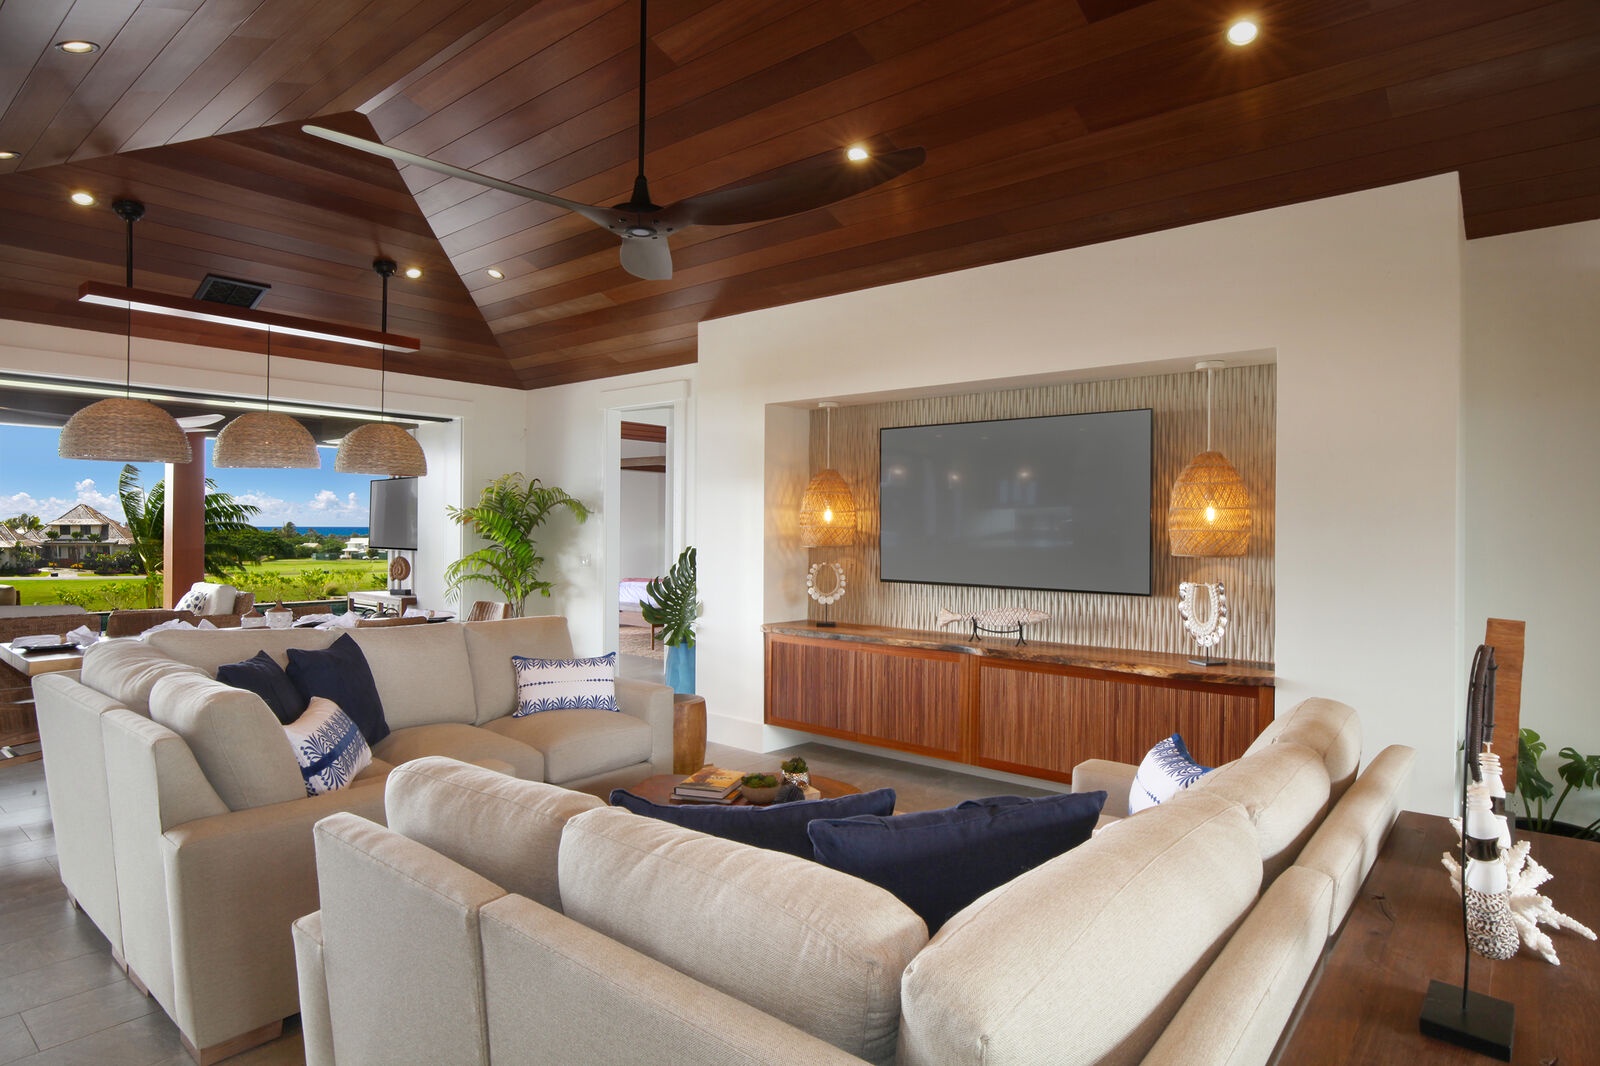 Koloa Vacation Rentals, Hale Kainani #6 E Komo Mai - The home is brand-new, finished and furnished in comfortable elegance with natural tones for a peaceful escape to paradise.